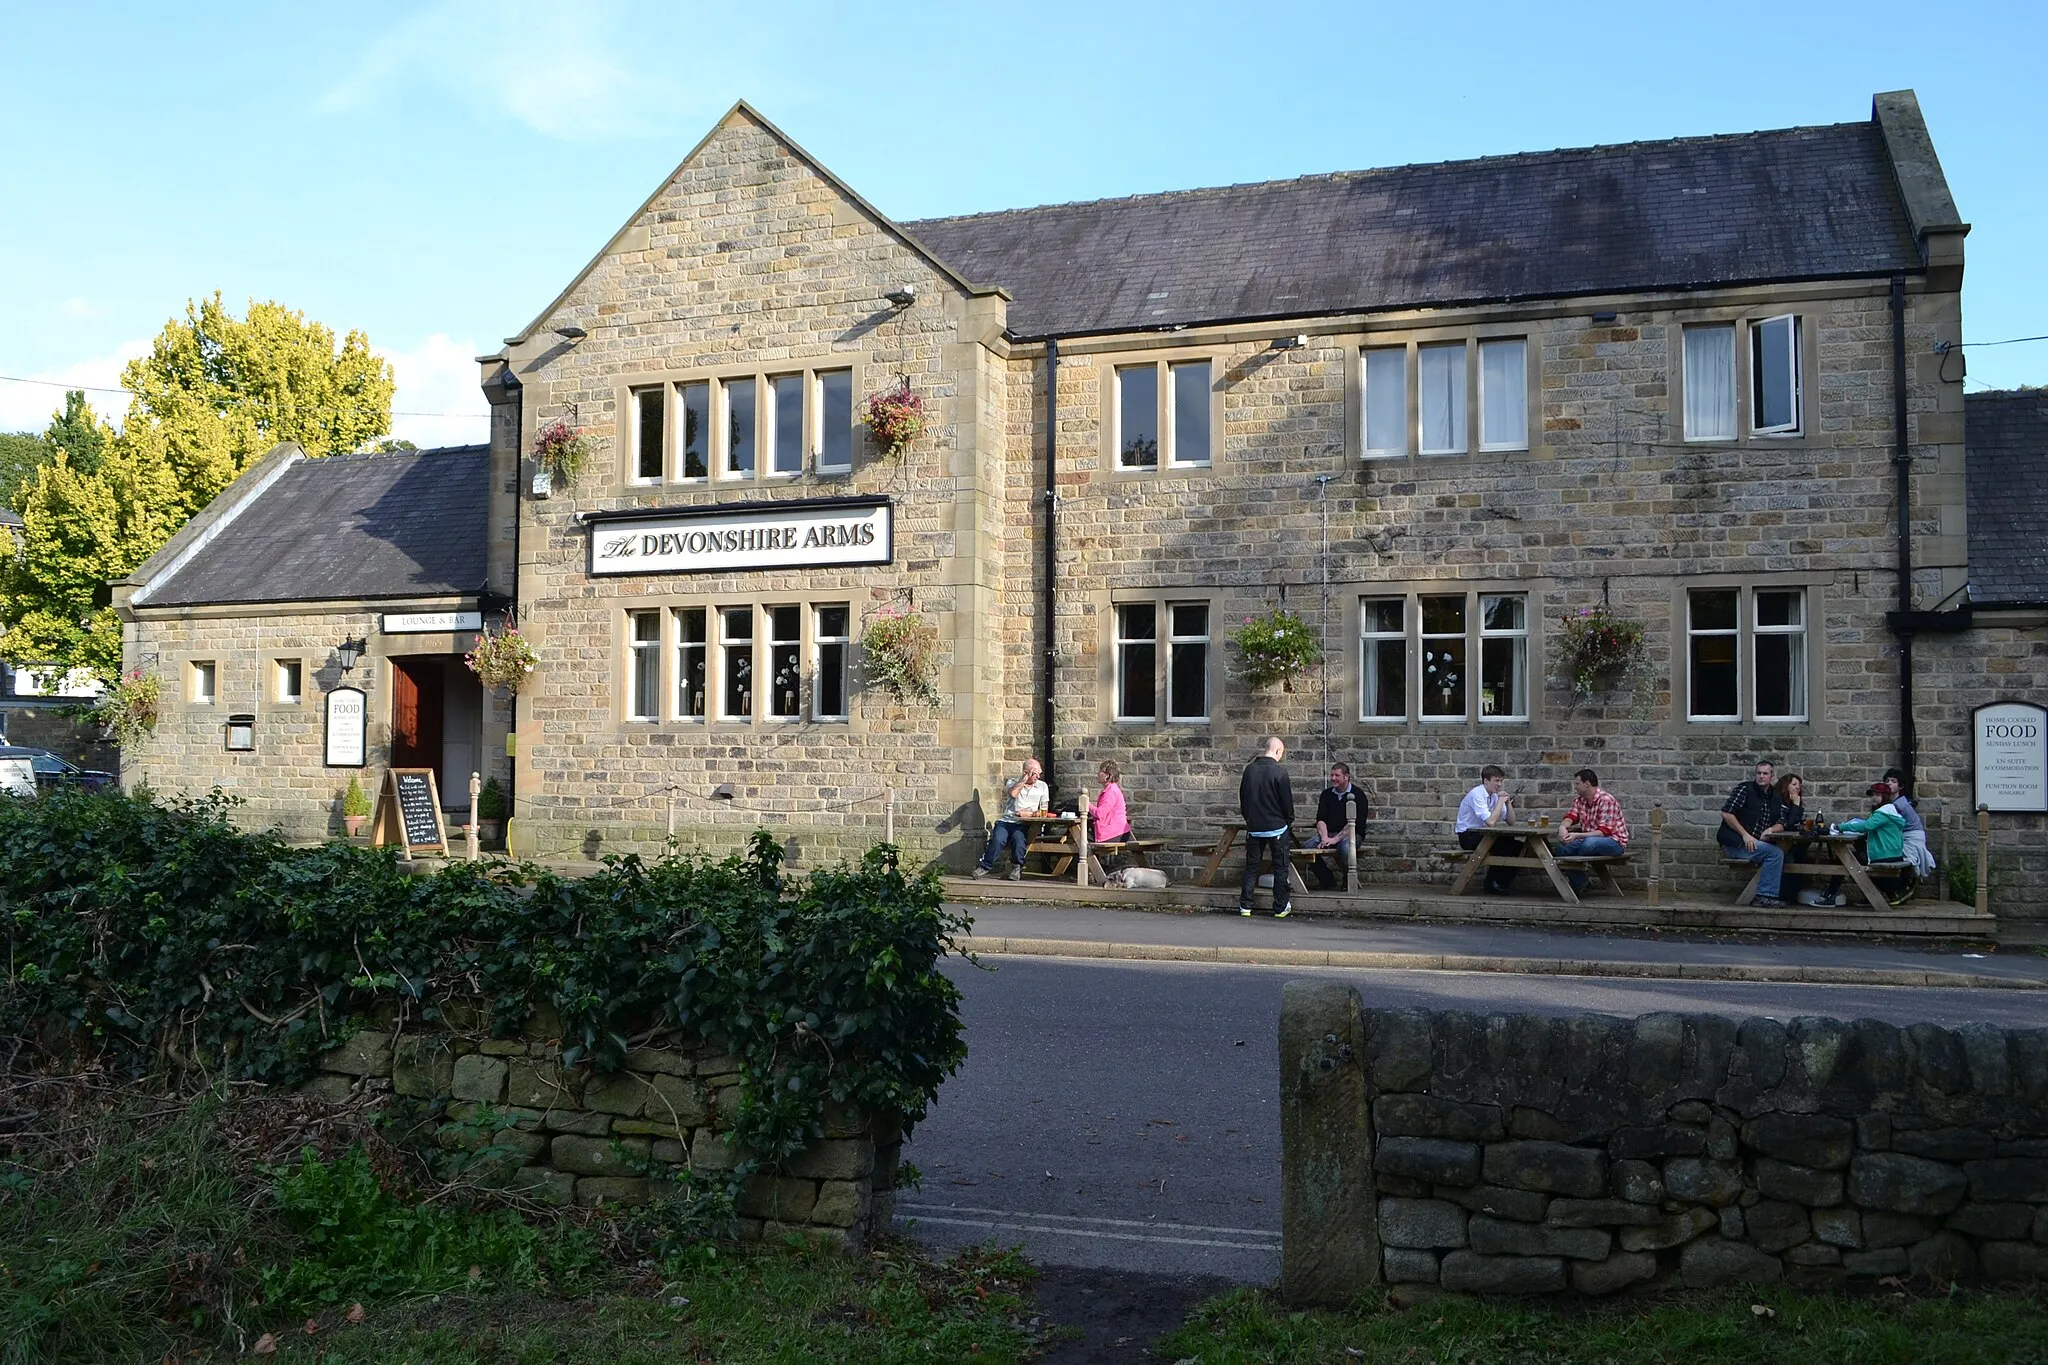 Photo showing: "The Devonshire Arms" in Baslow